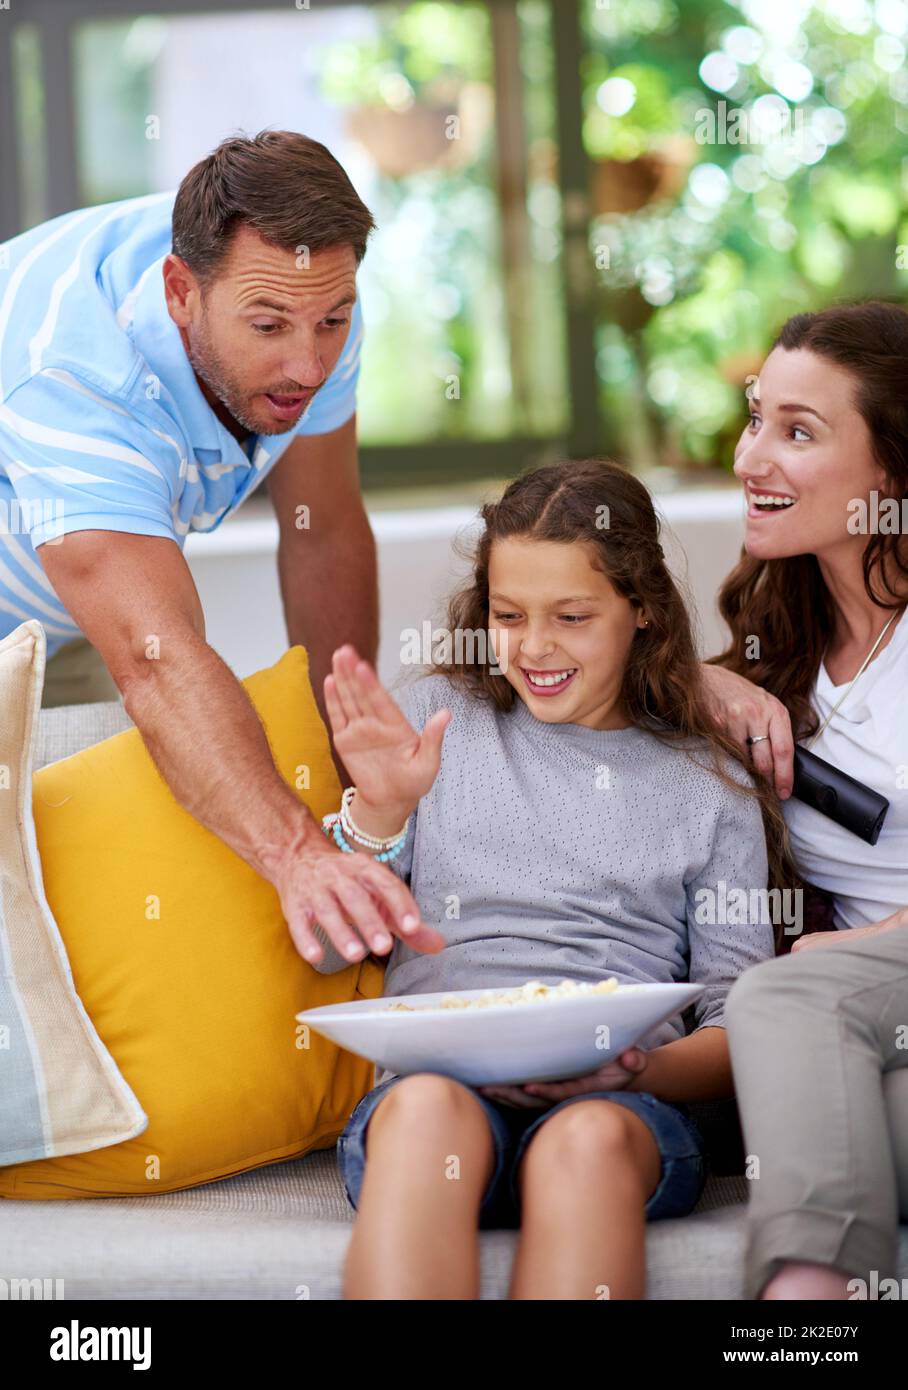 Gimme that popcorn. Cropped shot of a father teasing his daughter while watching a movie. Stock Photo